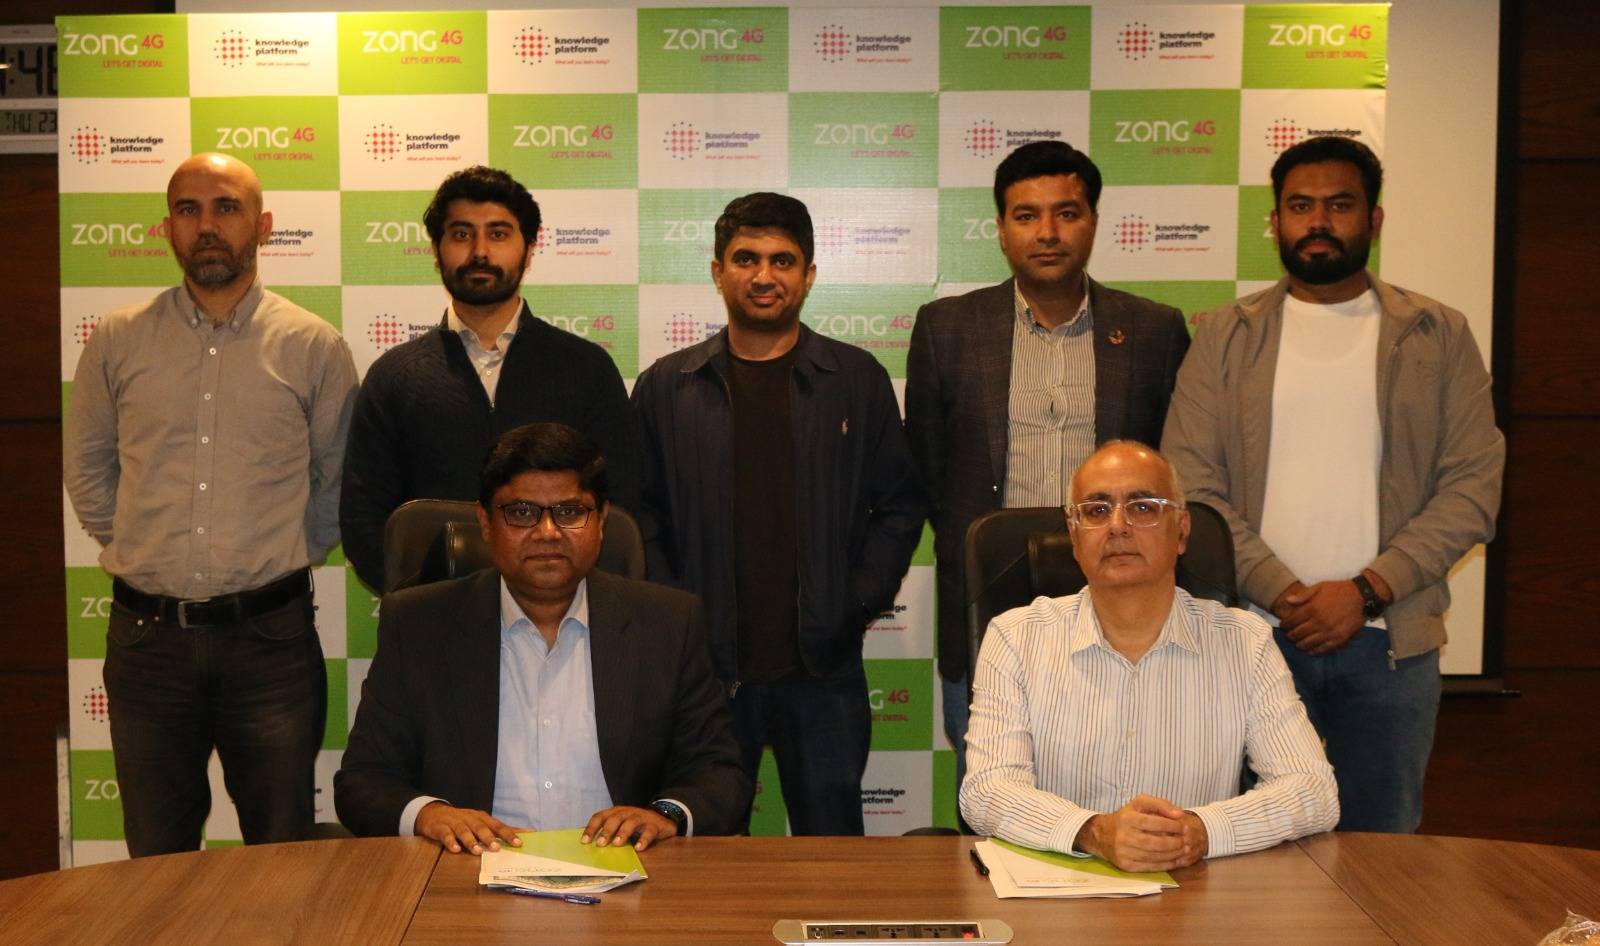 Zong 4G signs an MoU with “Knowledge Platform” for a state-of-the-art Learning Management System